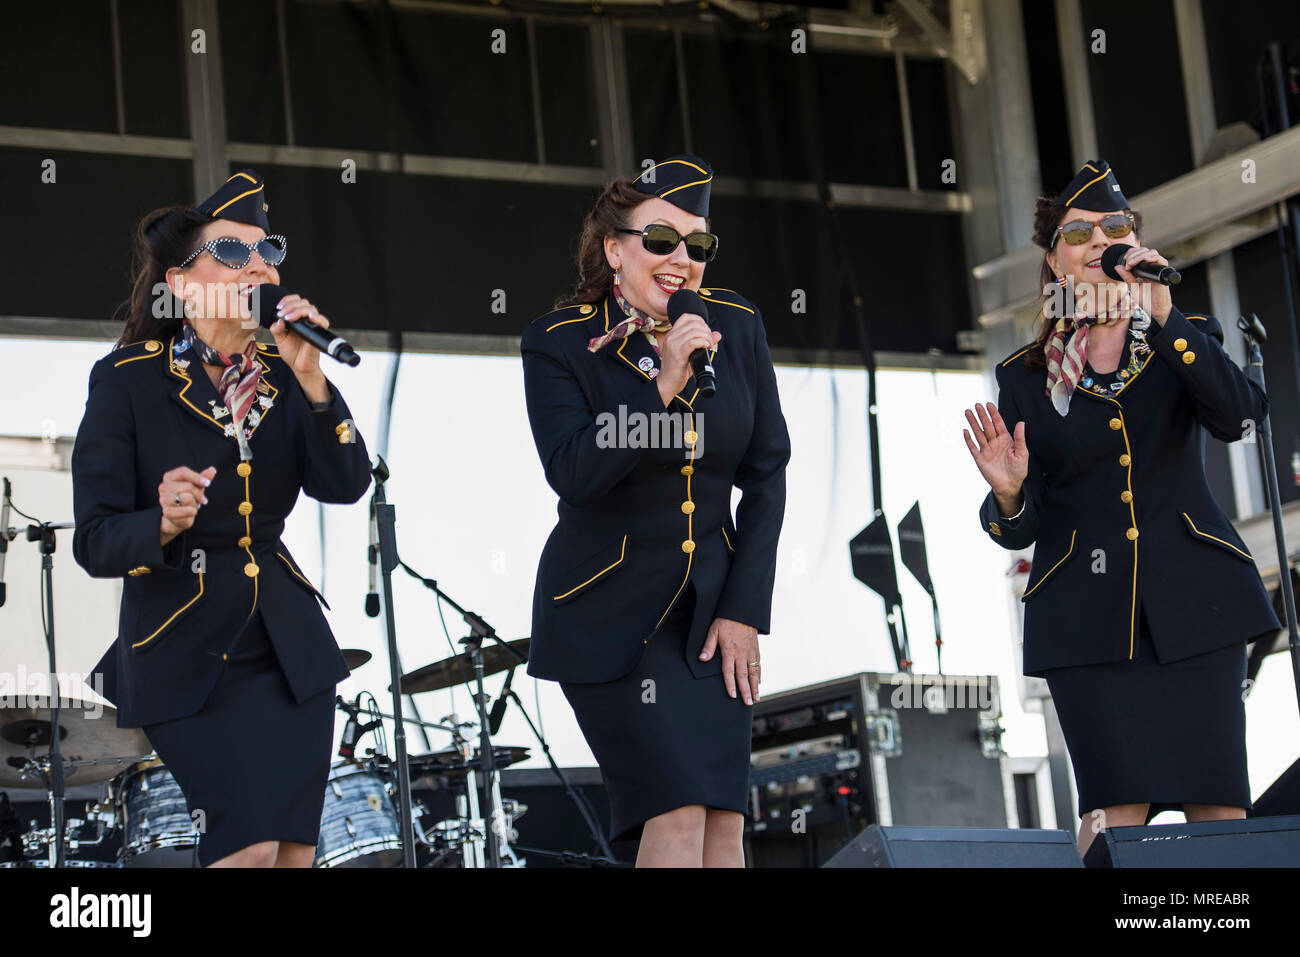 The Ladies for Liberty perform during the Scott Airshow and Open House at Scott Air Force Base, Ill., June 11, 2017. Ladies for Liberty is a singing troupe dedicated to performing the Andrew Sisters style of music through their own rendition of vocals, costumes, hairstyles, and the spirit of patriotism reminiscent of the 1940s. (U.S. Air Force photo by Tech. Sgt. Jonathan Fowler) Stock Photo